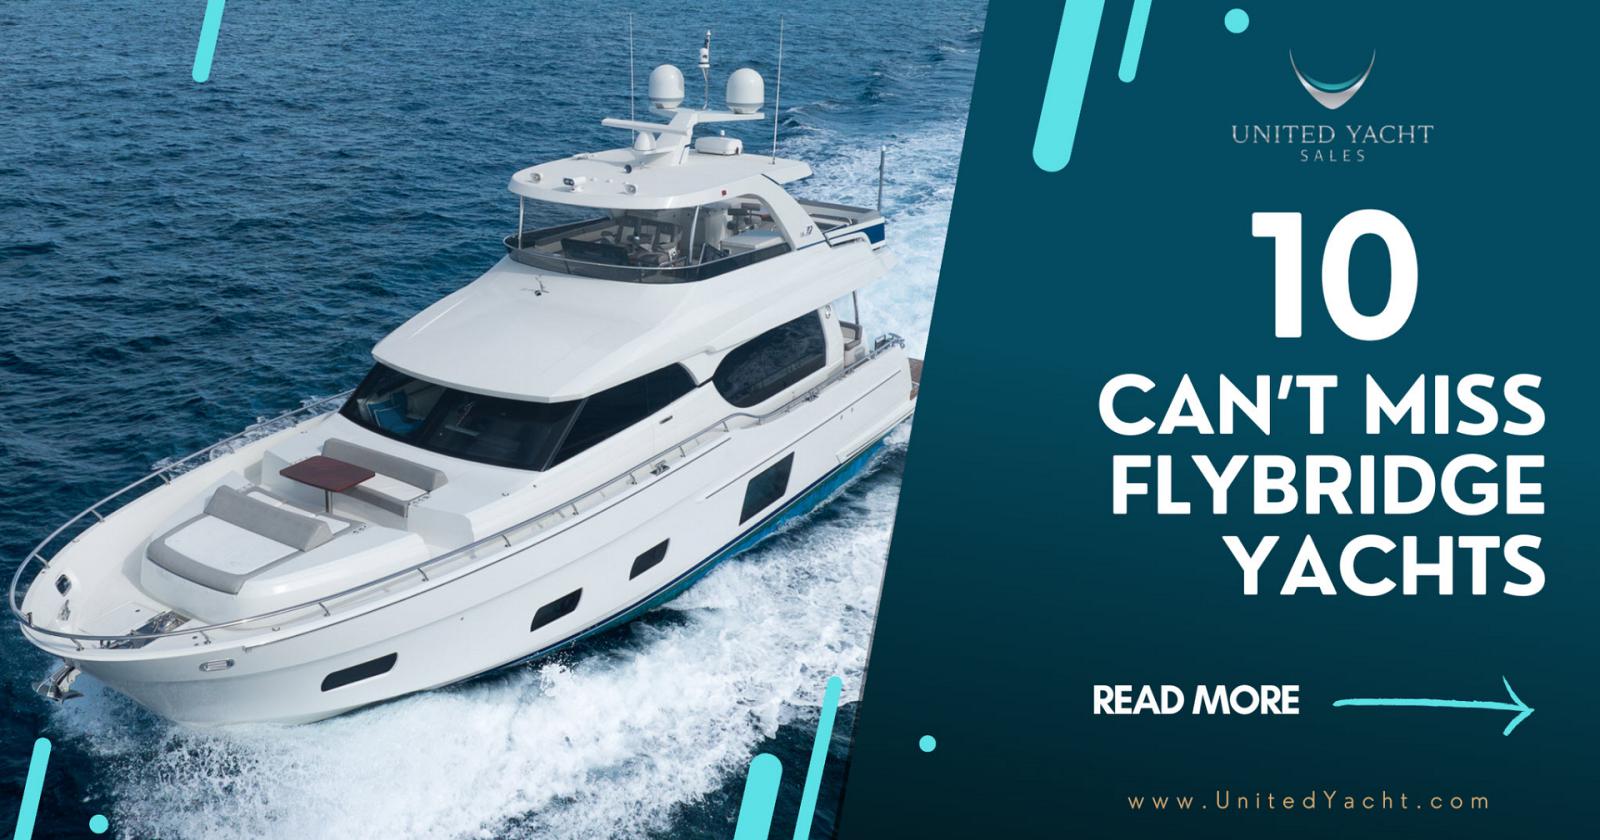 photo of 10 Fun Flybridge Yachts You Can't Miss